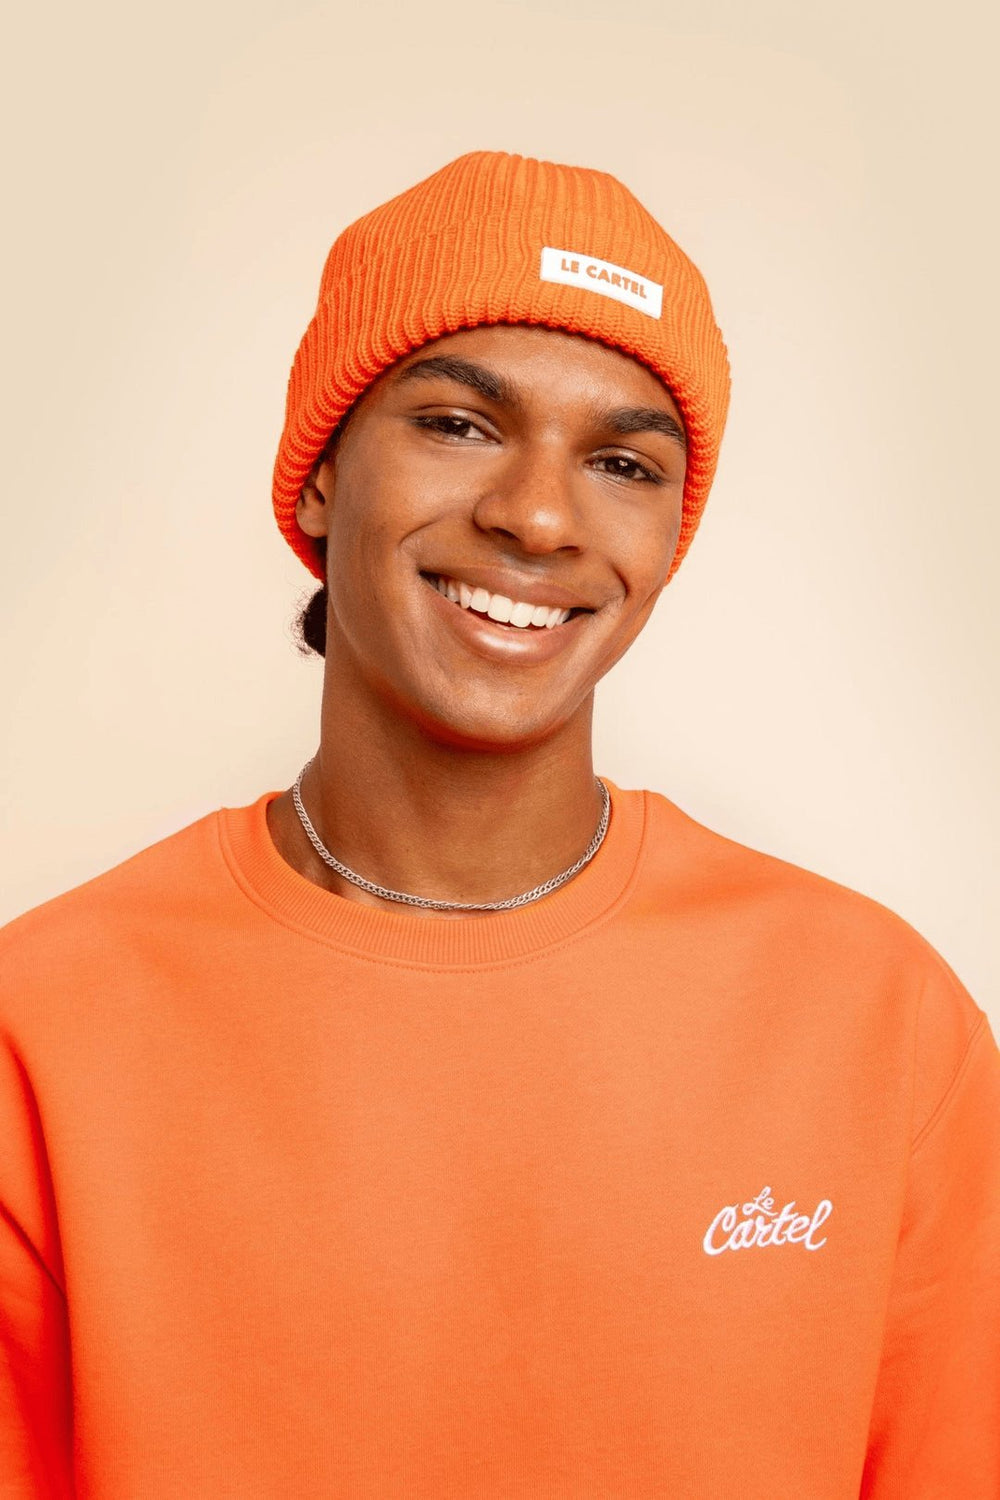 CHUNKY・Tuque grosse maille・Orange - Le Cartel